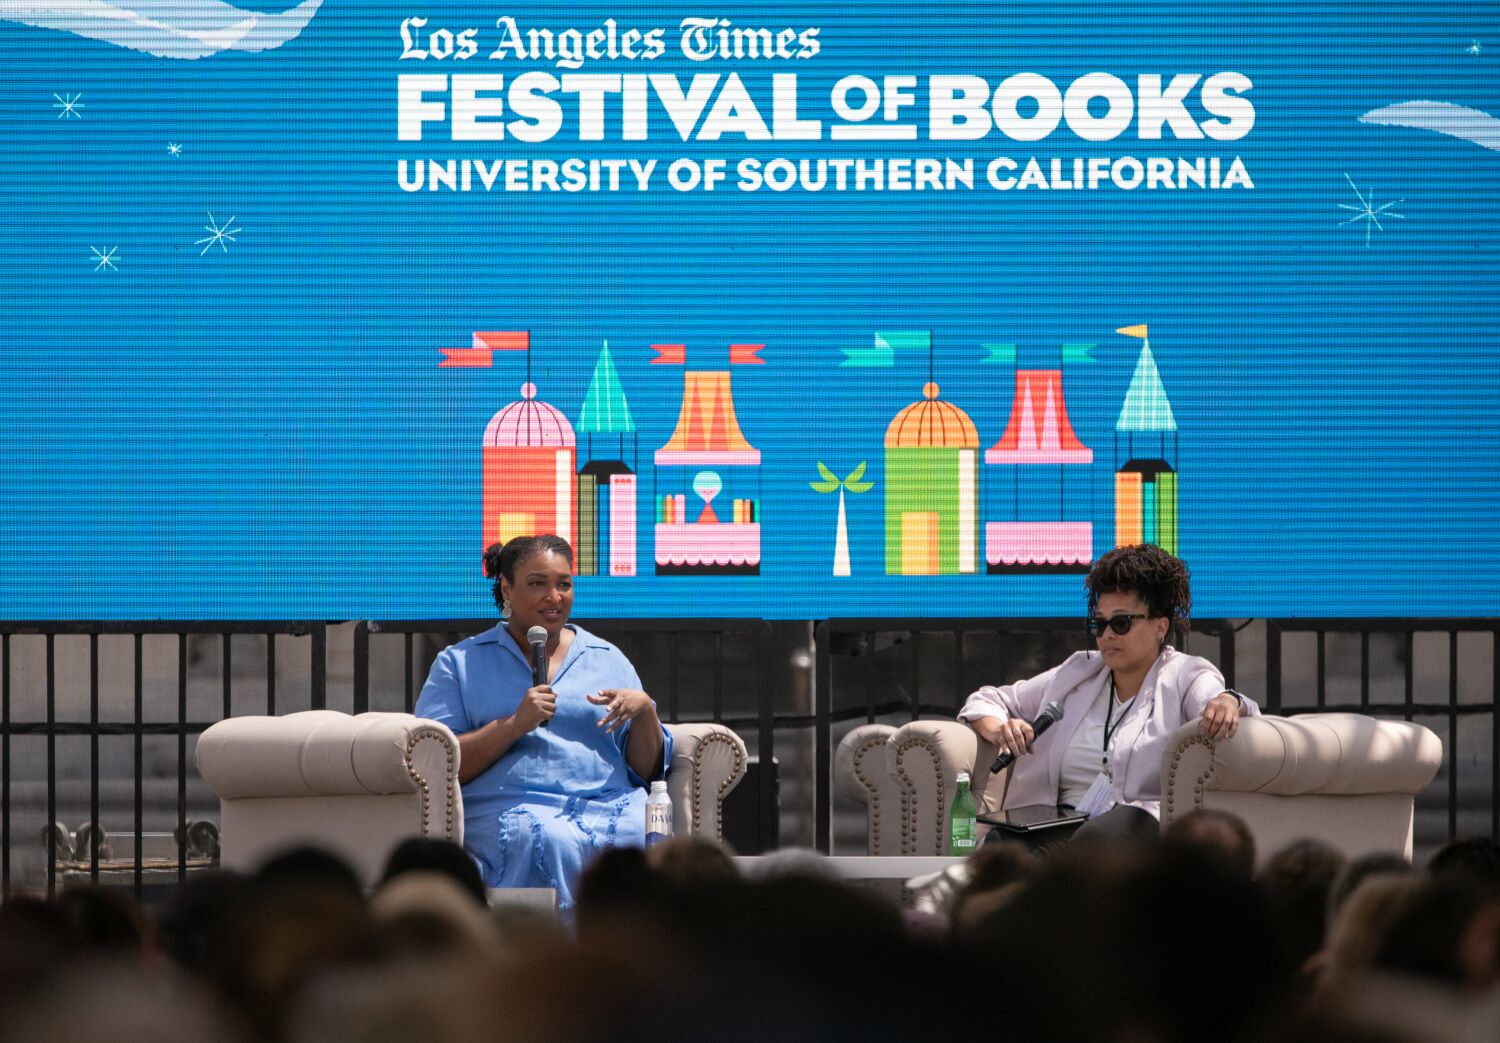 Big names and big dreams dominate second day of L.A. Times Festival of Books